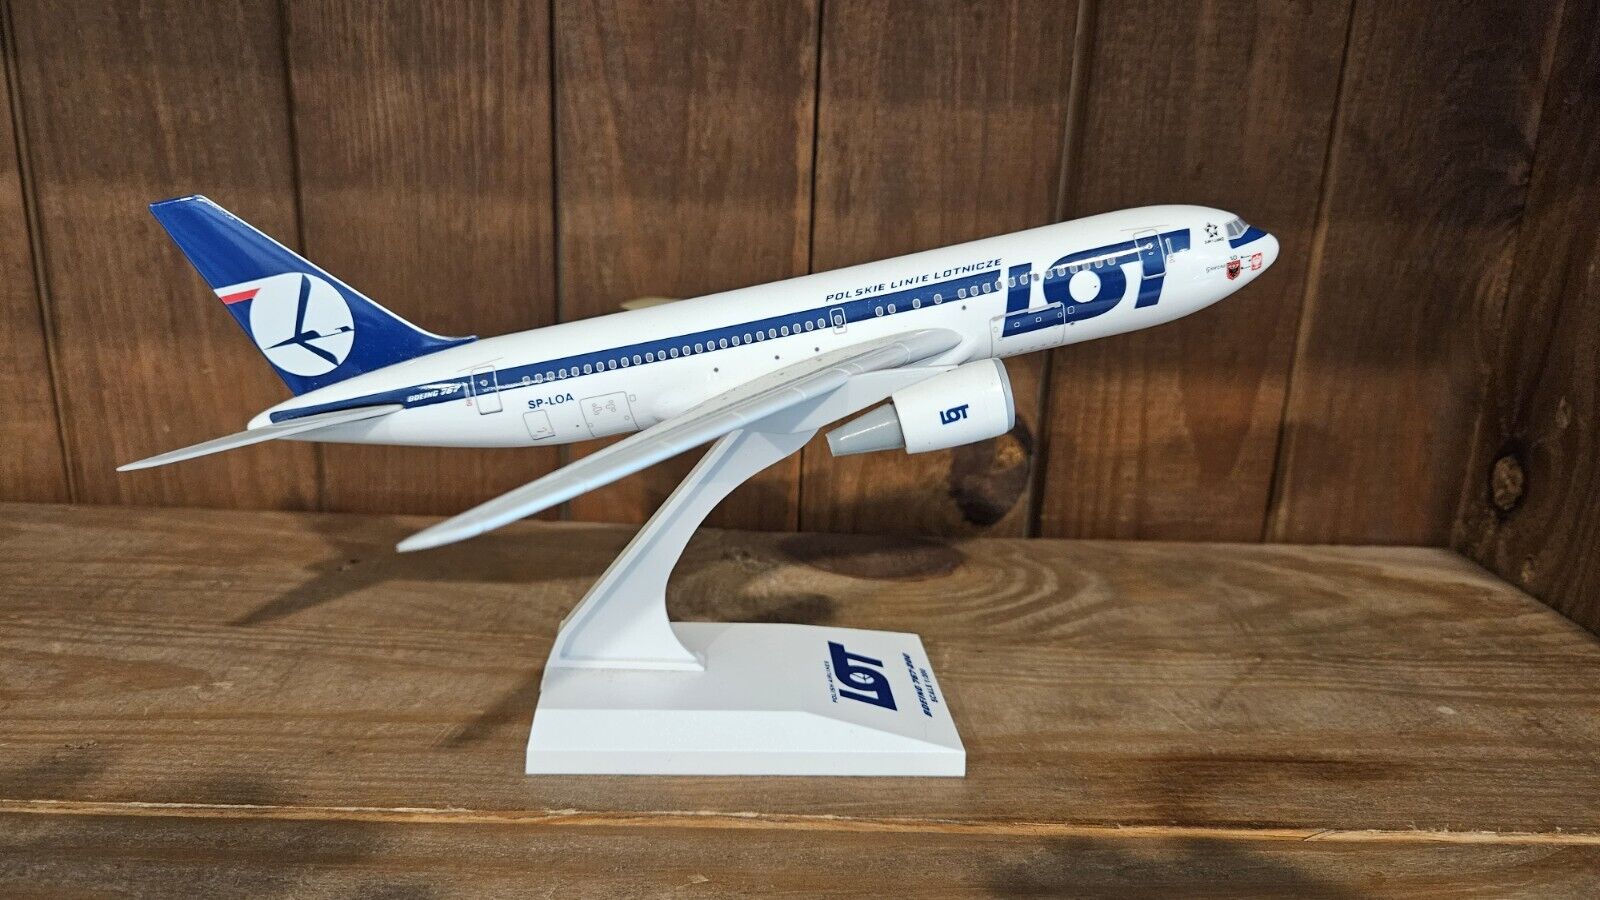 LOT Polish Airlines Boeing 767 Plastic Snap Fit Model